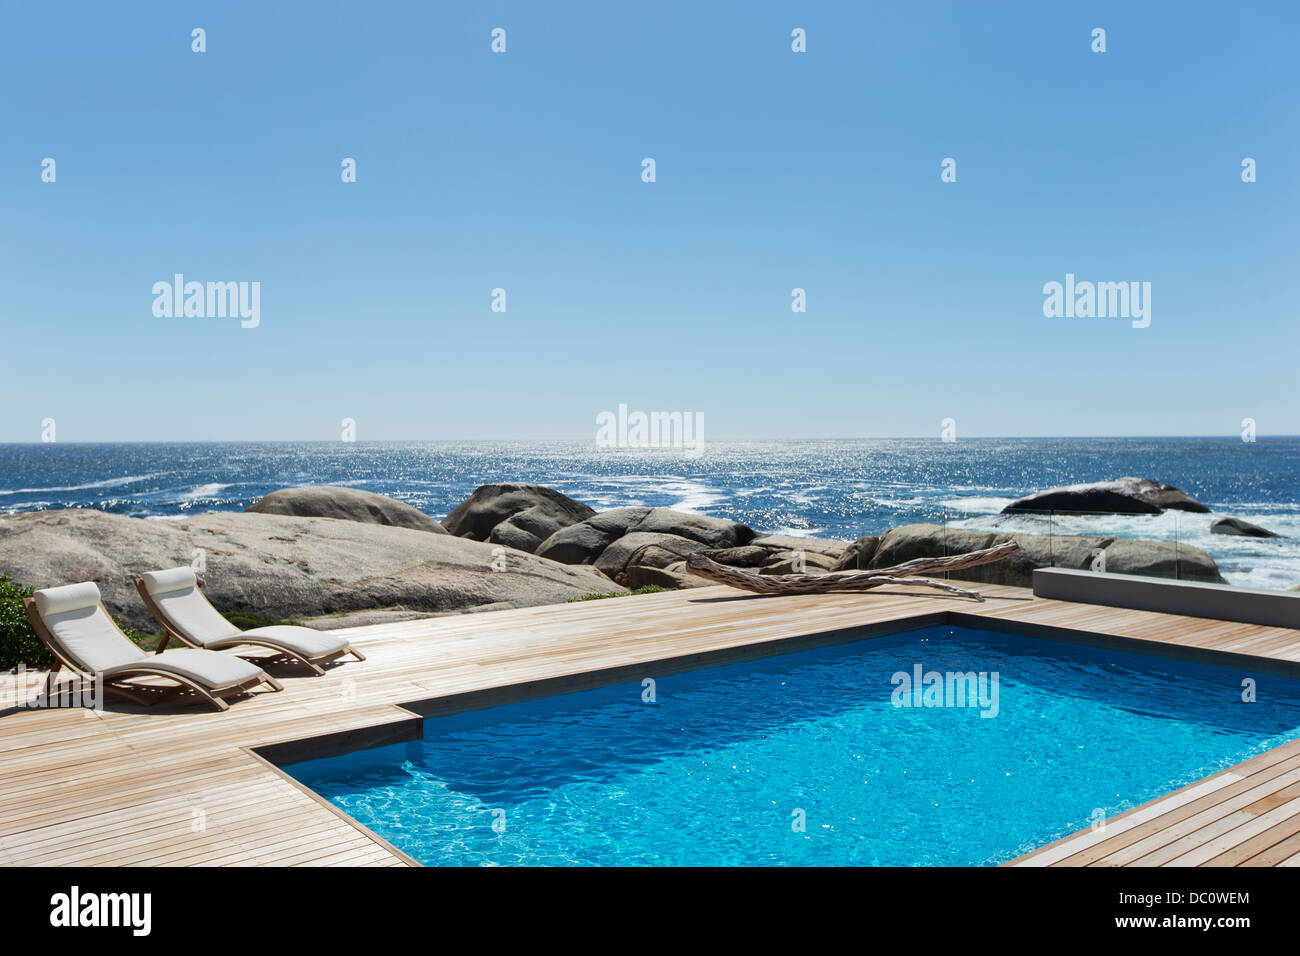 Swimming pool with ocean view Stock Photo